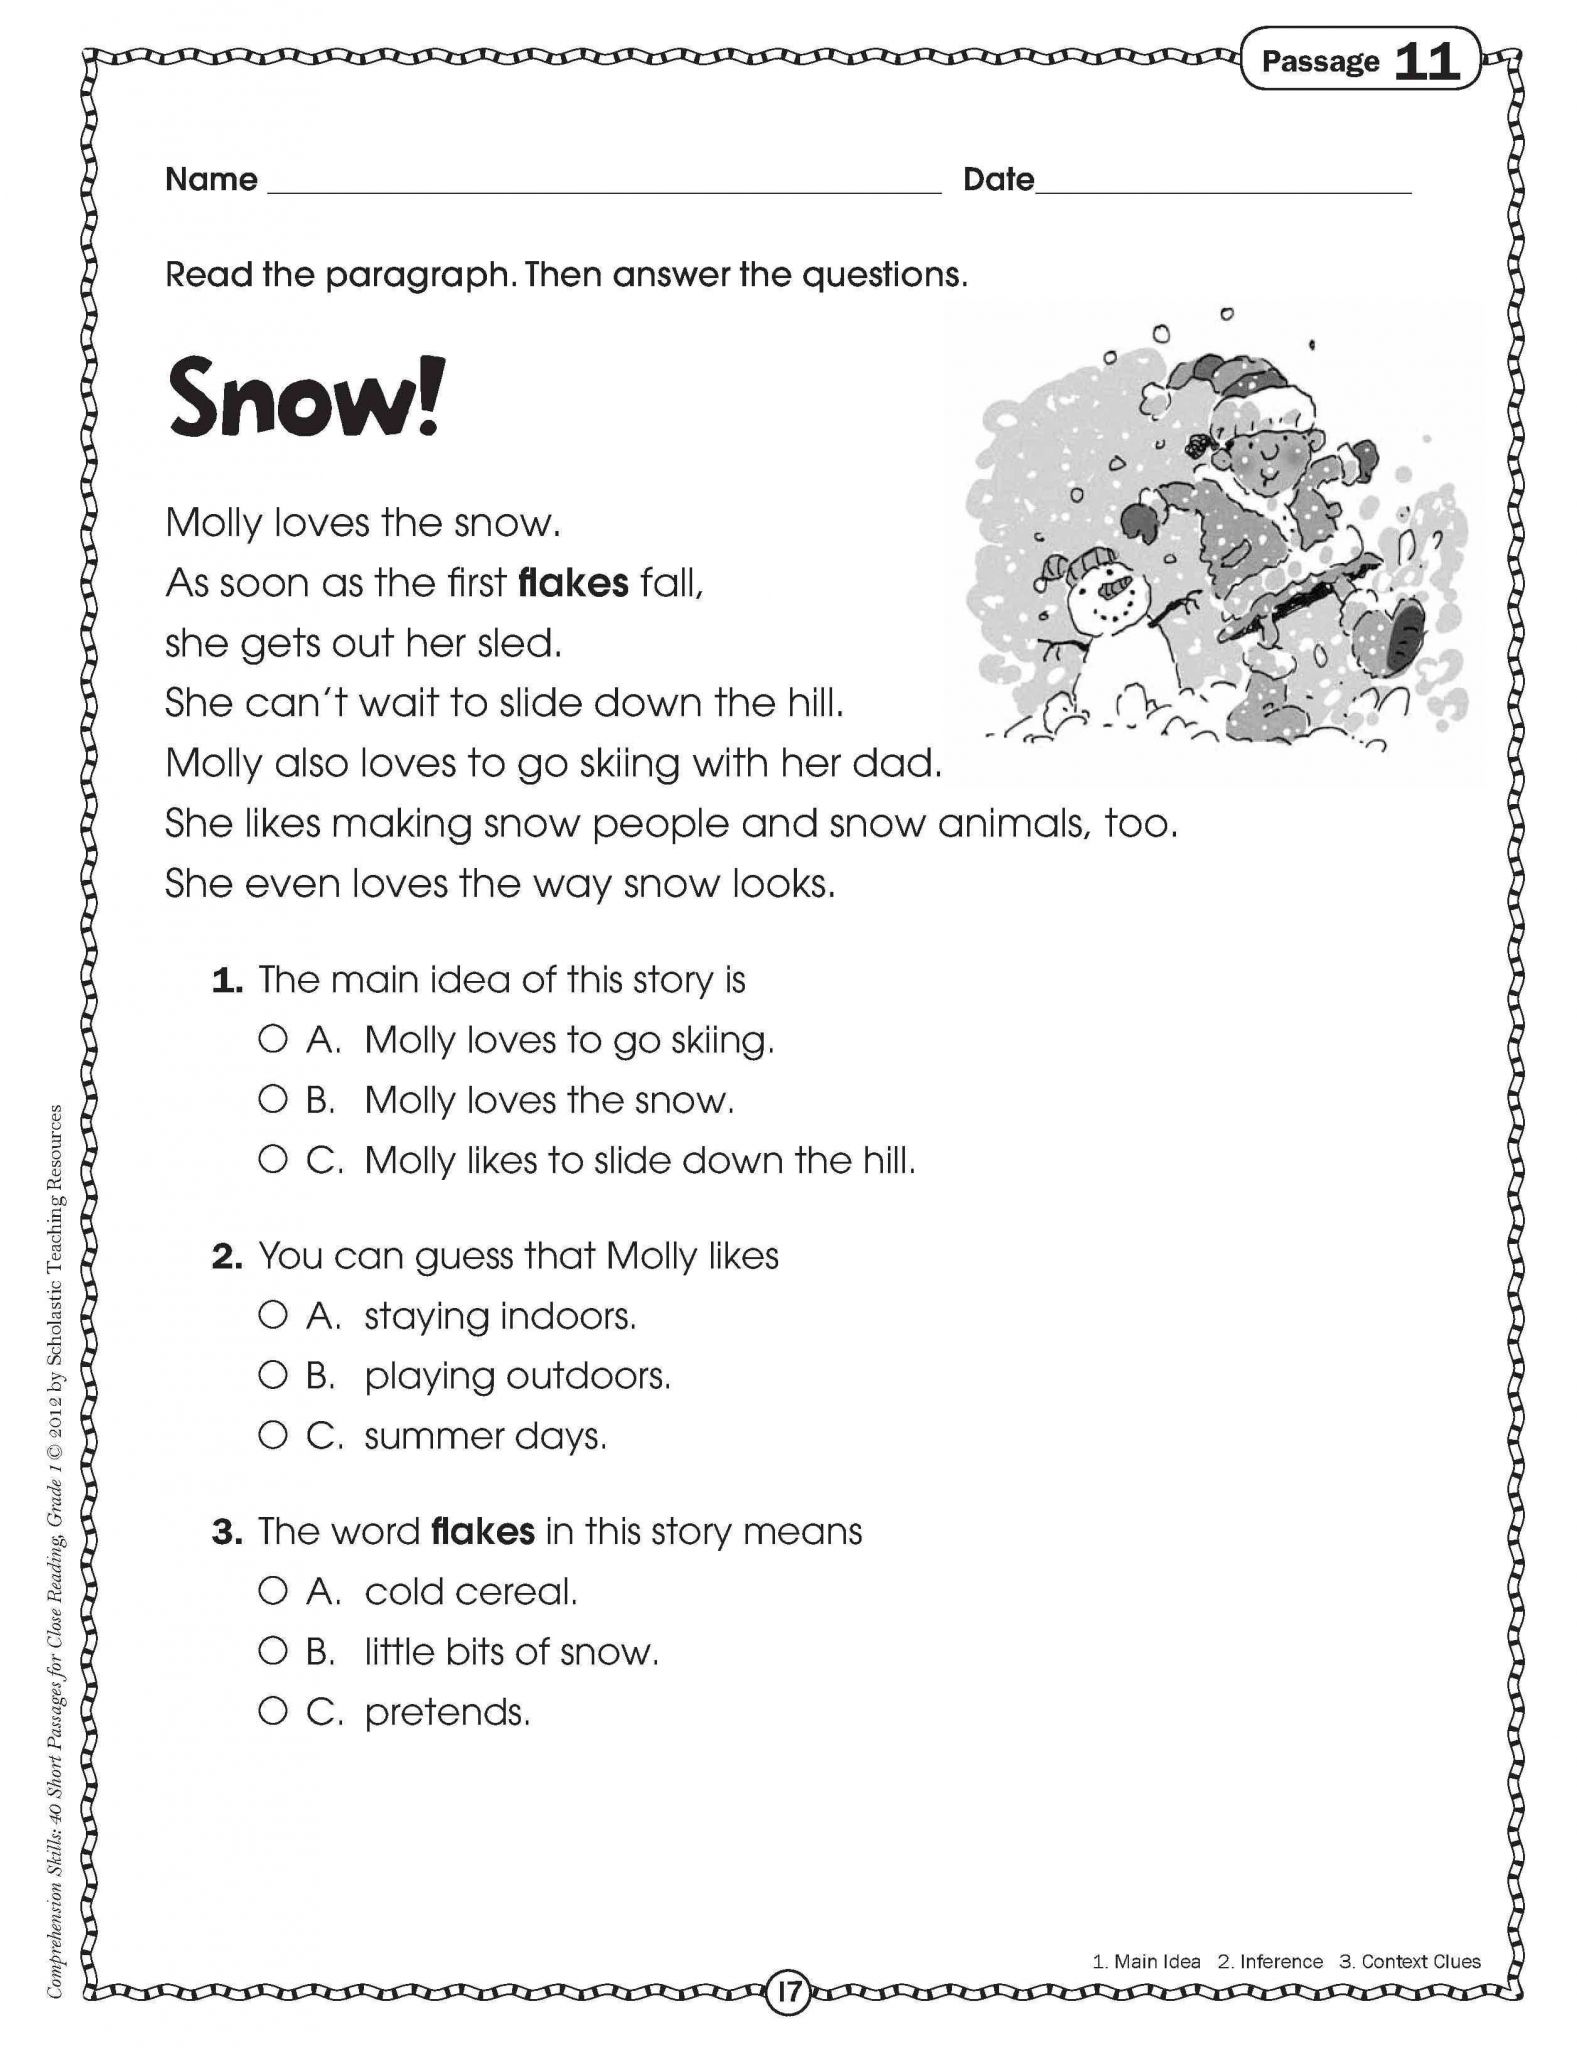 Free Sentence Scramble Worksheets and Word form Worksheets Save English Worksheets About Christmas